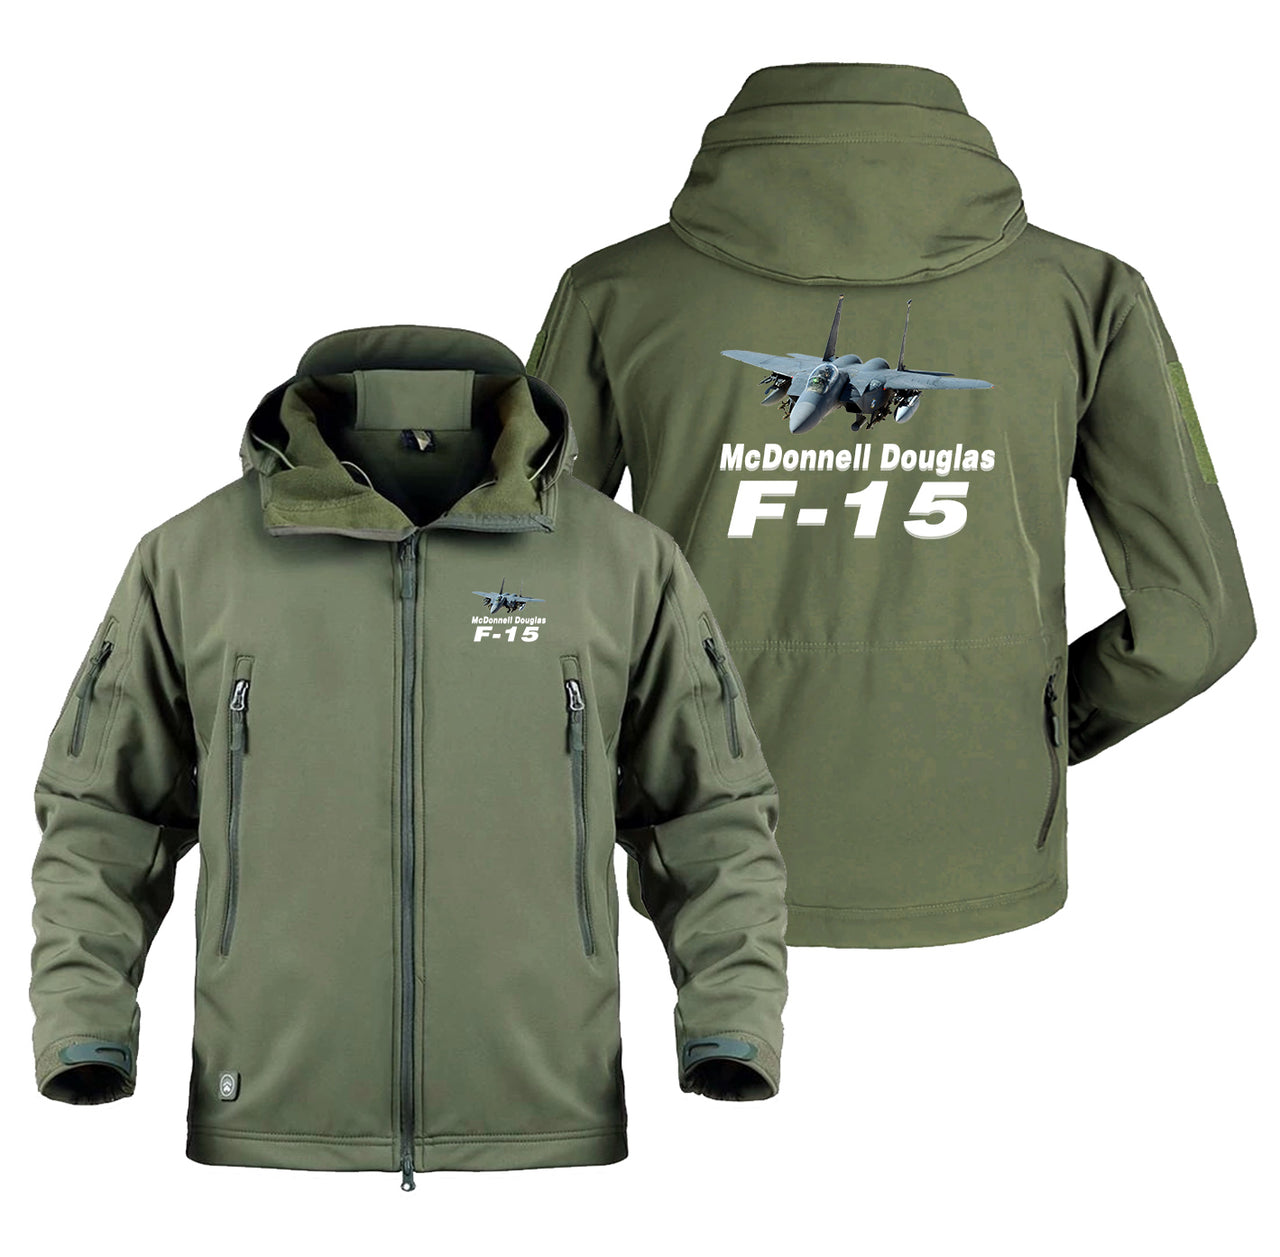 The McDonnell Douglas F15 Designed Military Jackets (Customizable)